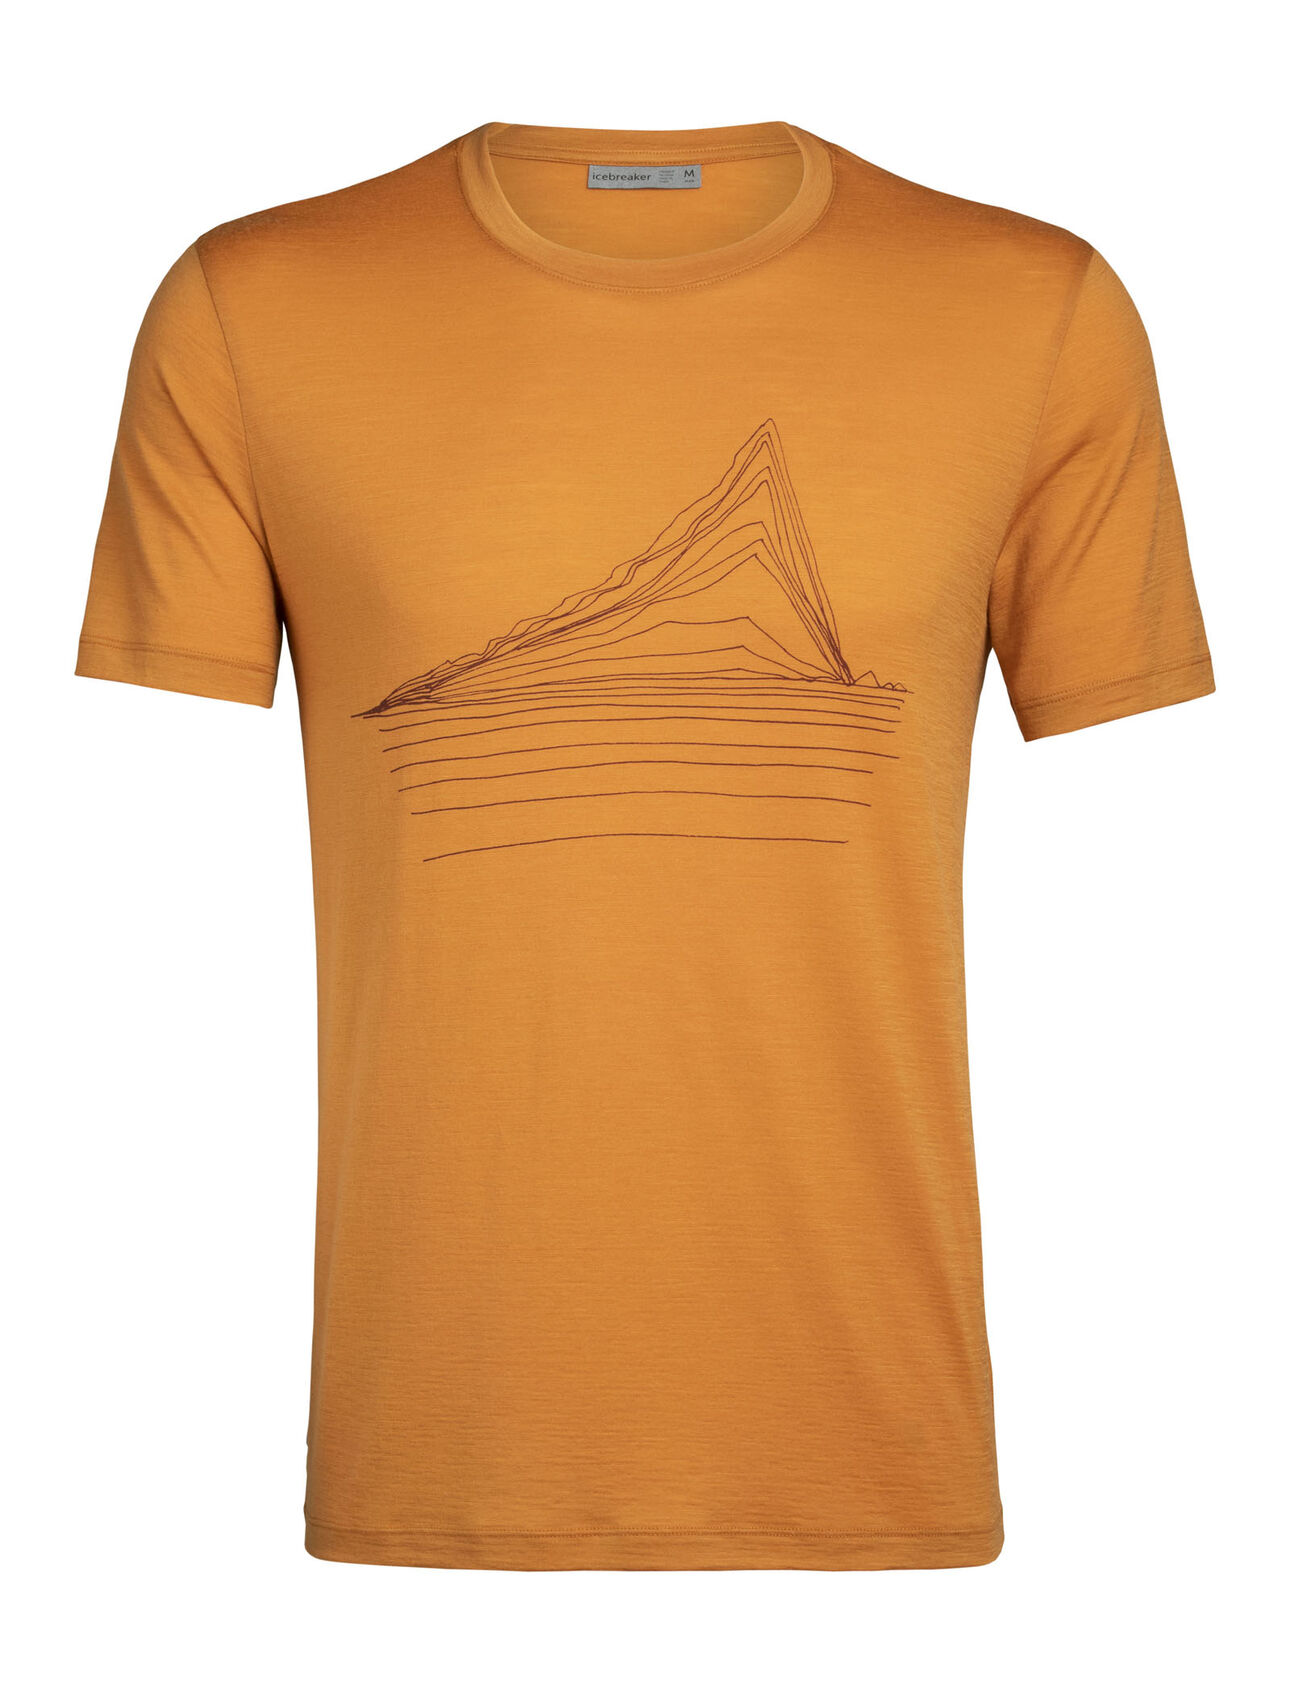 Mens Merino Tech Lite Short Sleeve Crewe T-Shirt Heating Up Our most versatile tech tee, in breathable, odor-resistant merino wool with a slight stretch. Artist William Carden-Horton creates a striking image of glacial sea ice in his iconic line-drawing style.